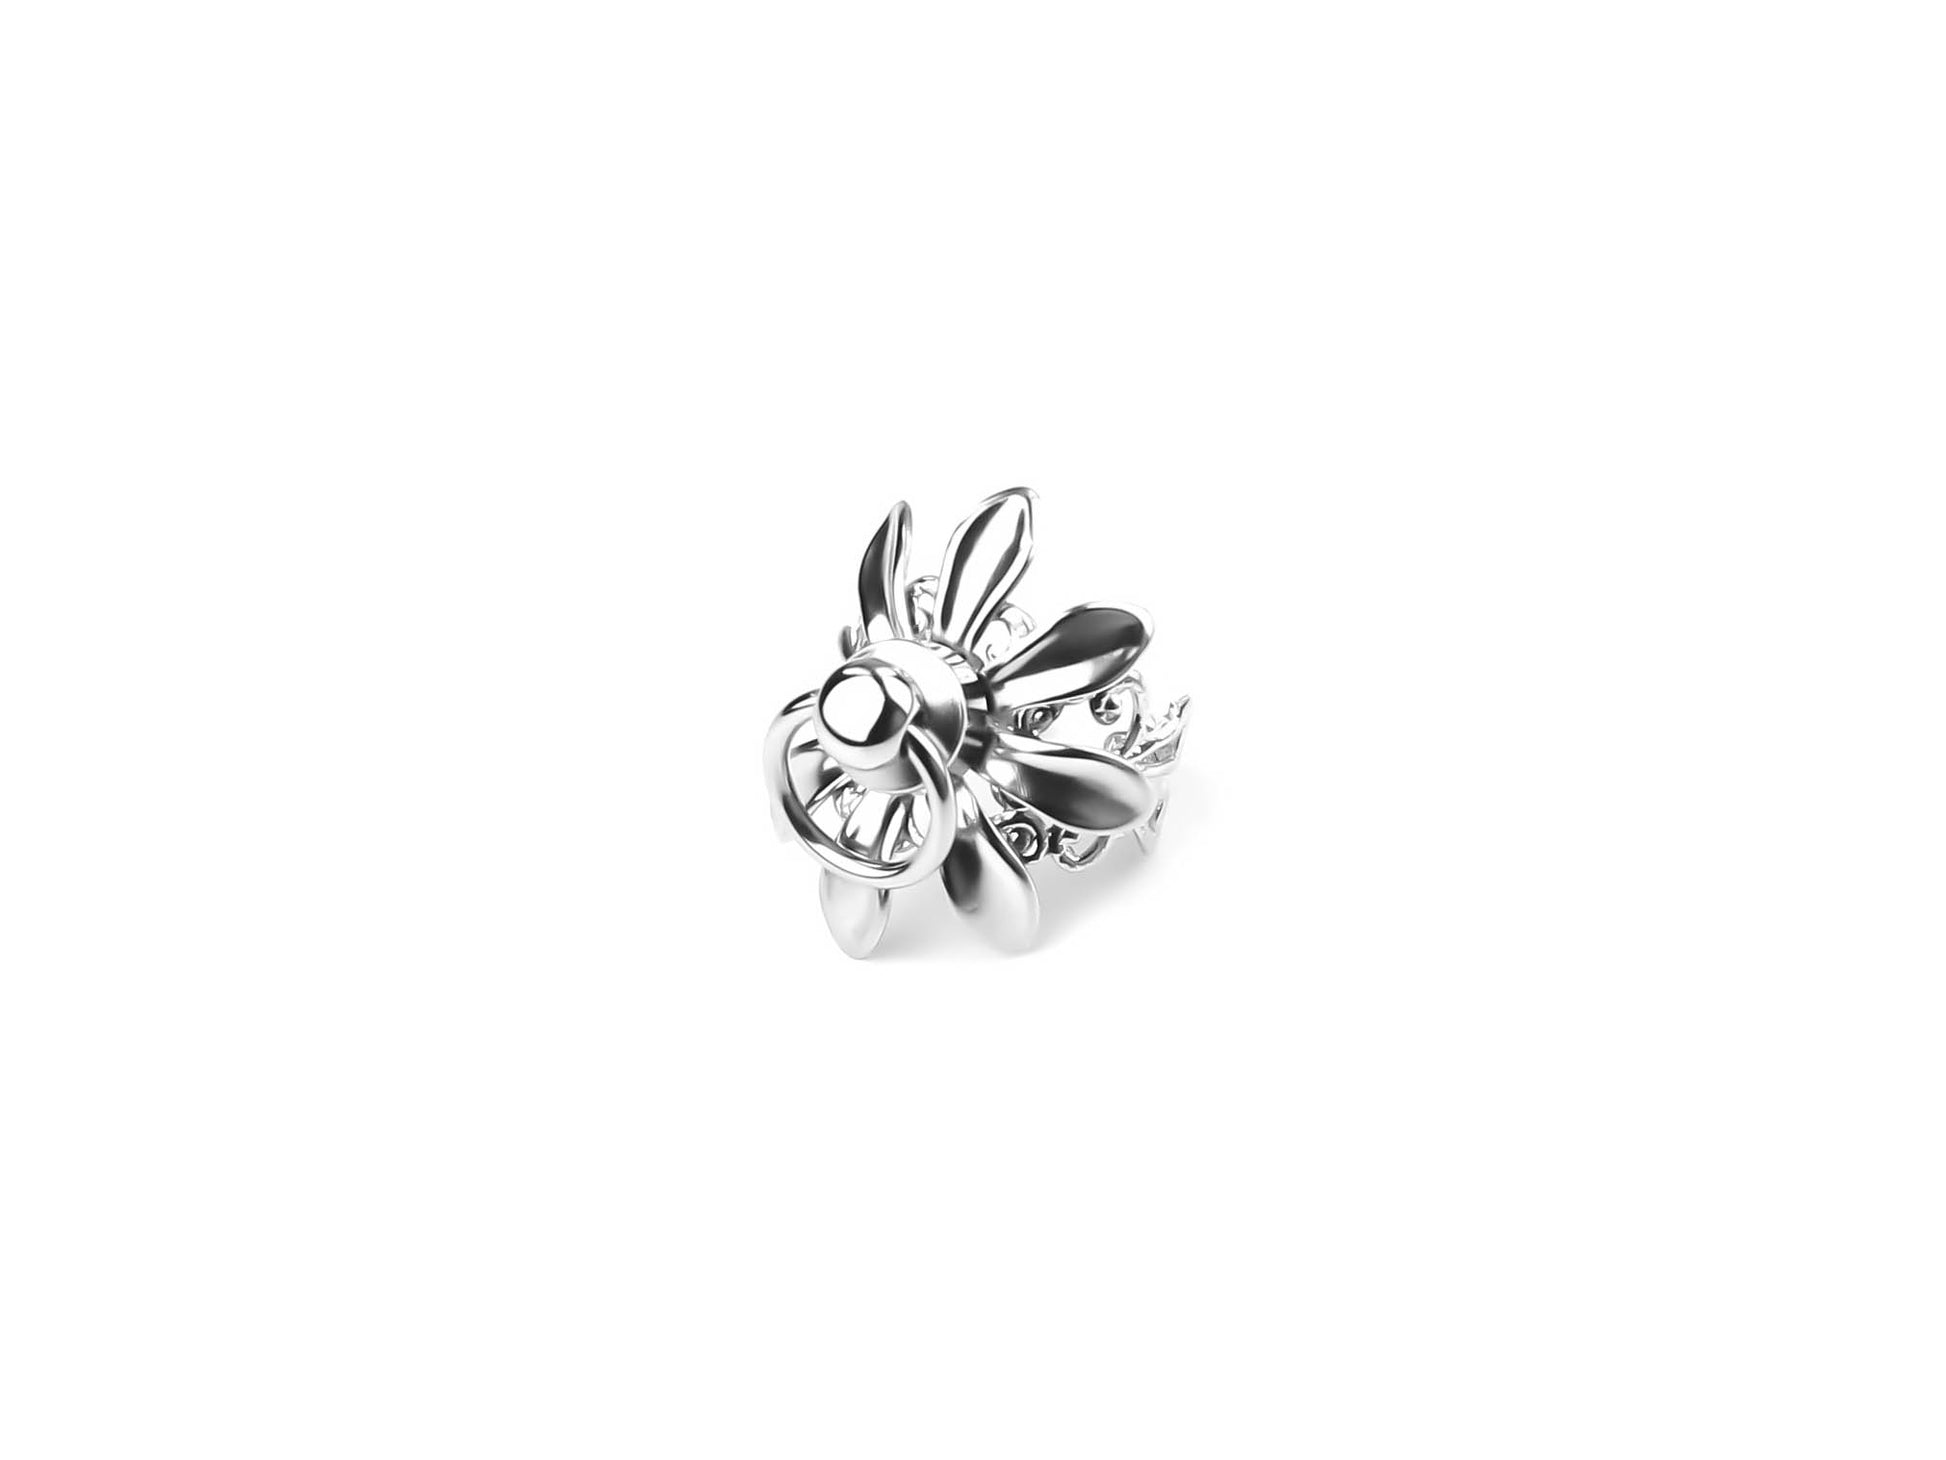 Striking Myril Jewels Flower ring, crafted in Italy, gleams against a pristine background. Its dark-avantgarde design with floral-inspired elements is perfect for those seeking bold, gothic-style accessories.